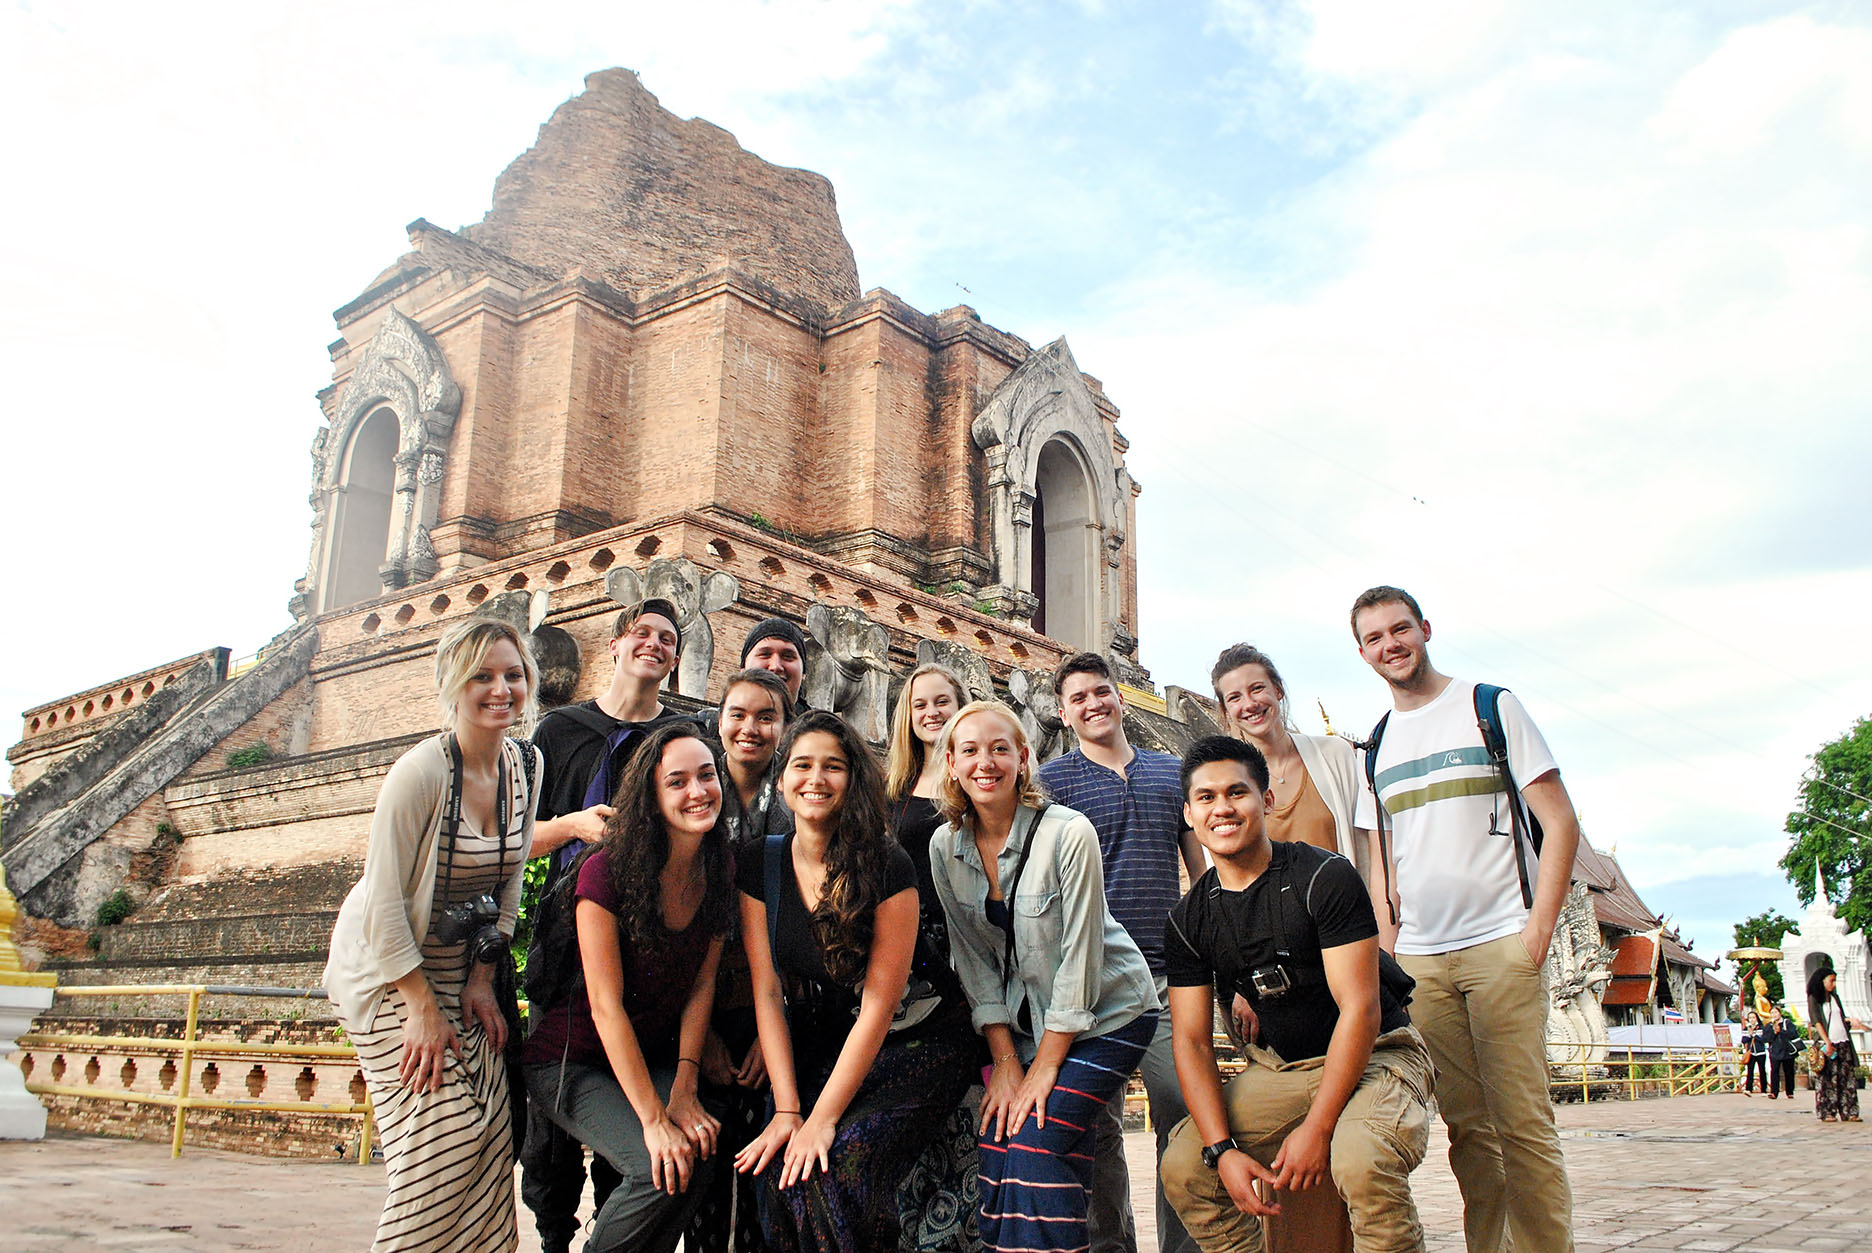 Students in front of a Thai temple (wat) in Chiang Mai, Thailand.